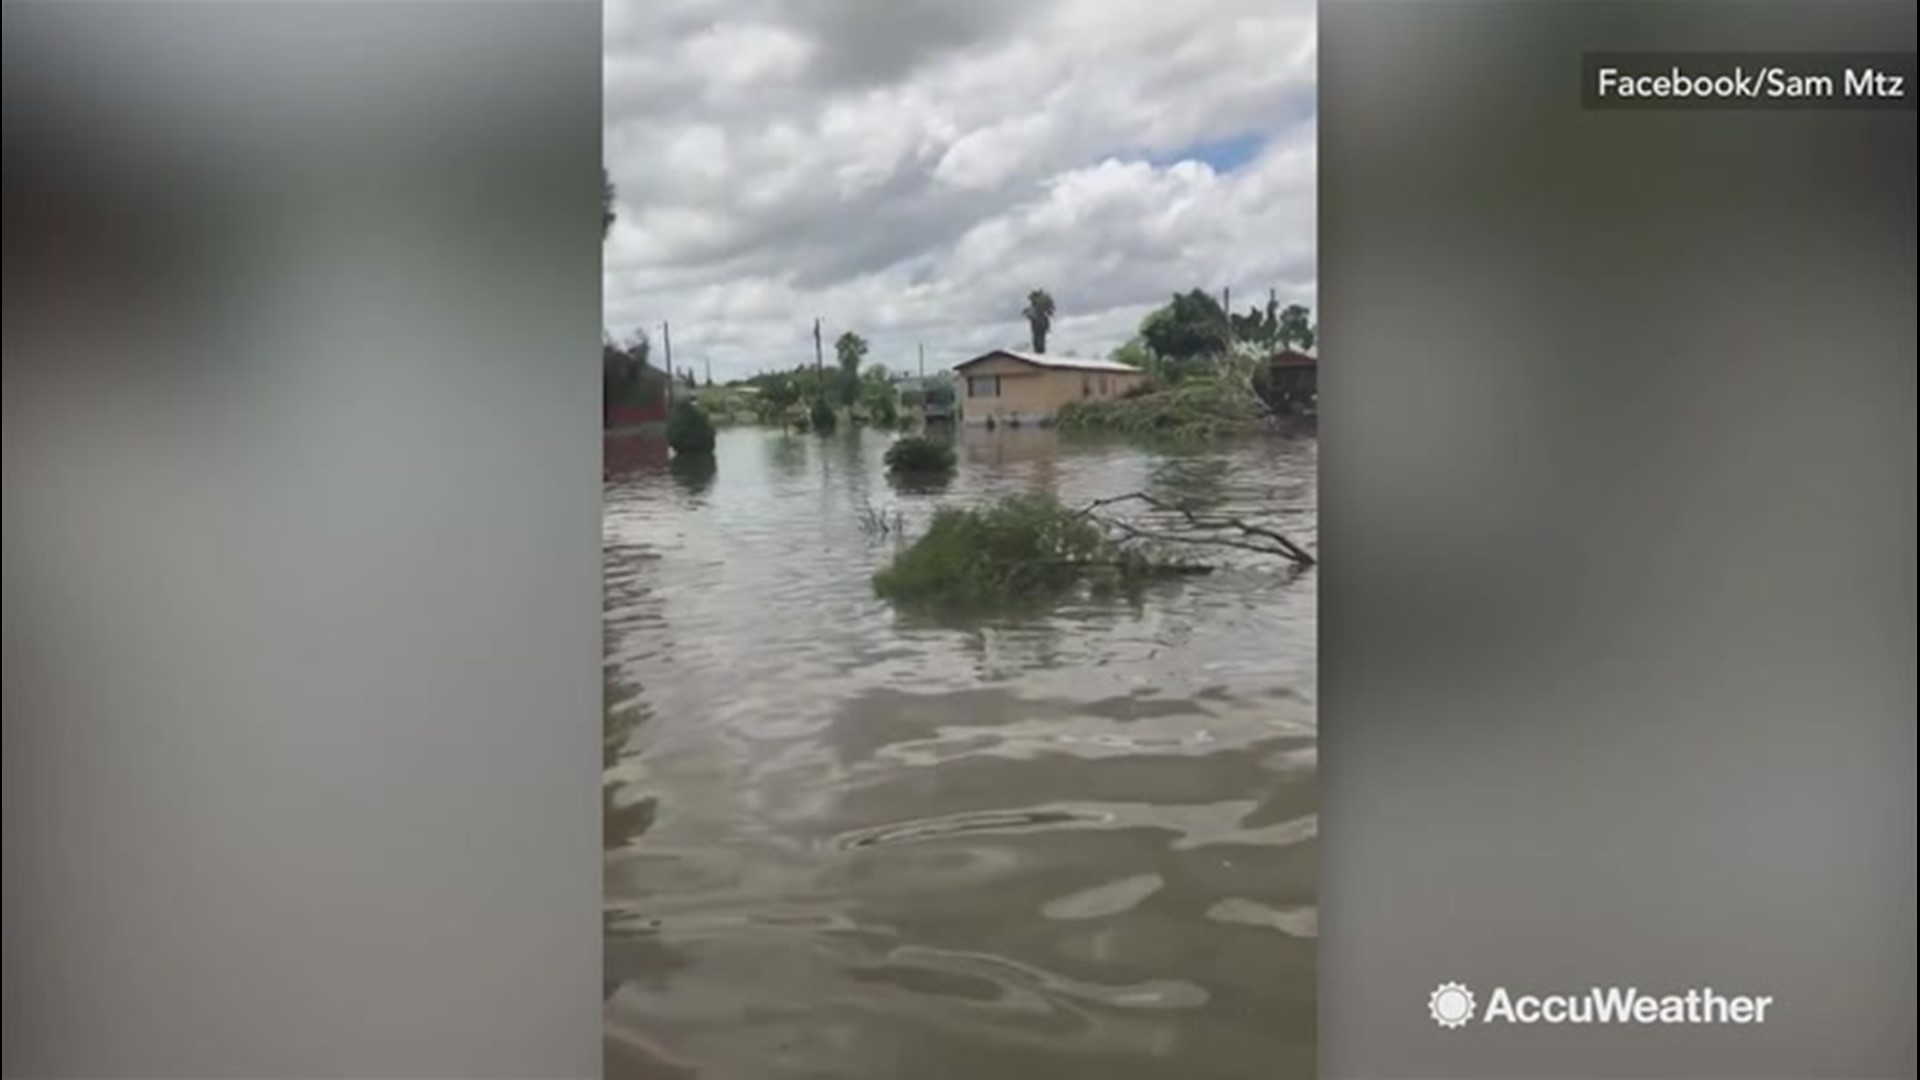 Sam Mtz went live on Facebook when a severe thunderstorm with high winds tore through Monte Alto, Texas June 24th. The next day, the neighborhood remained flooded.